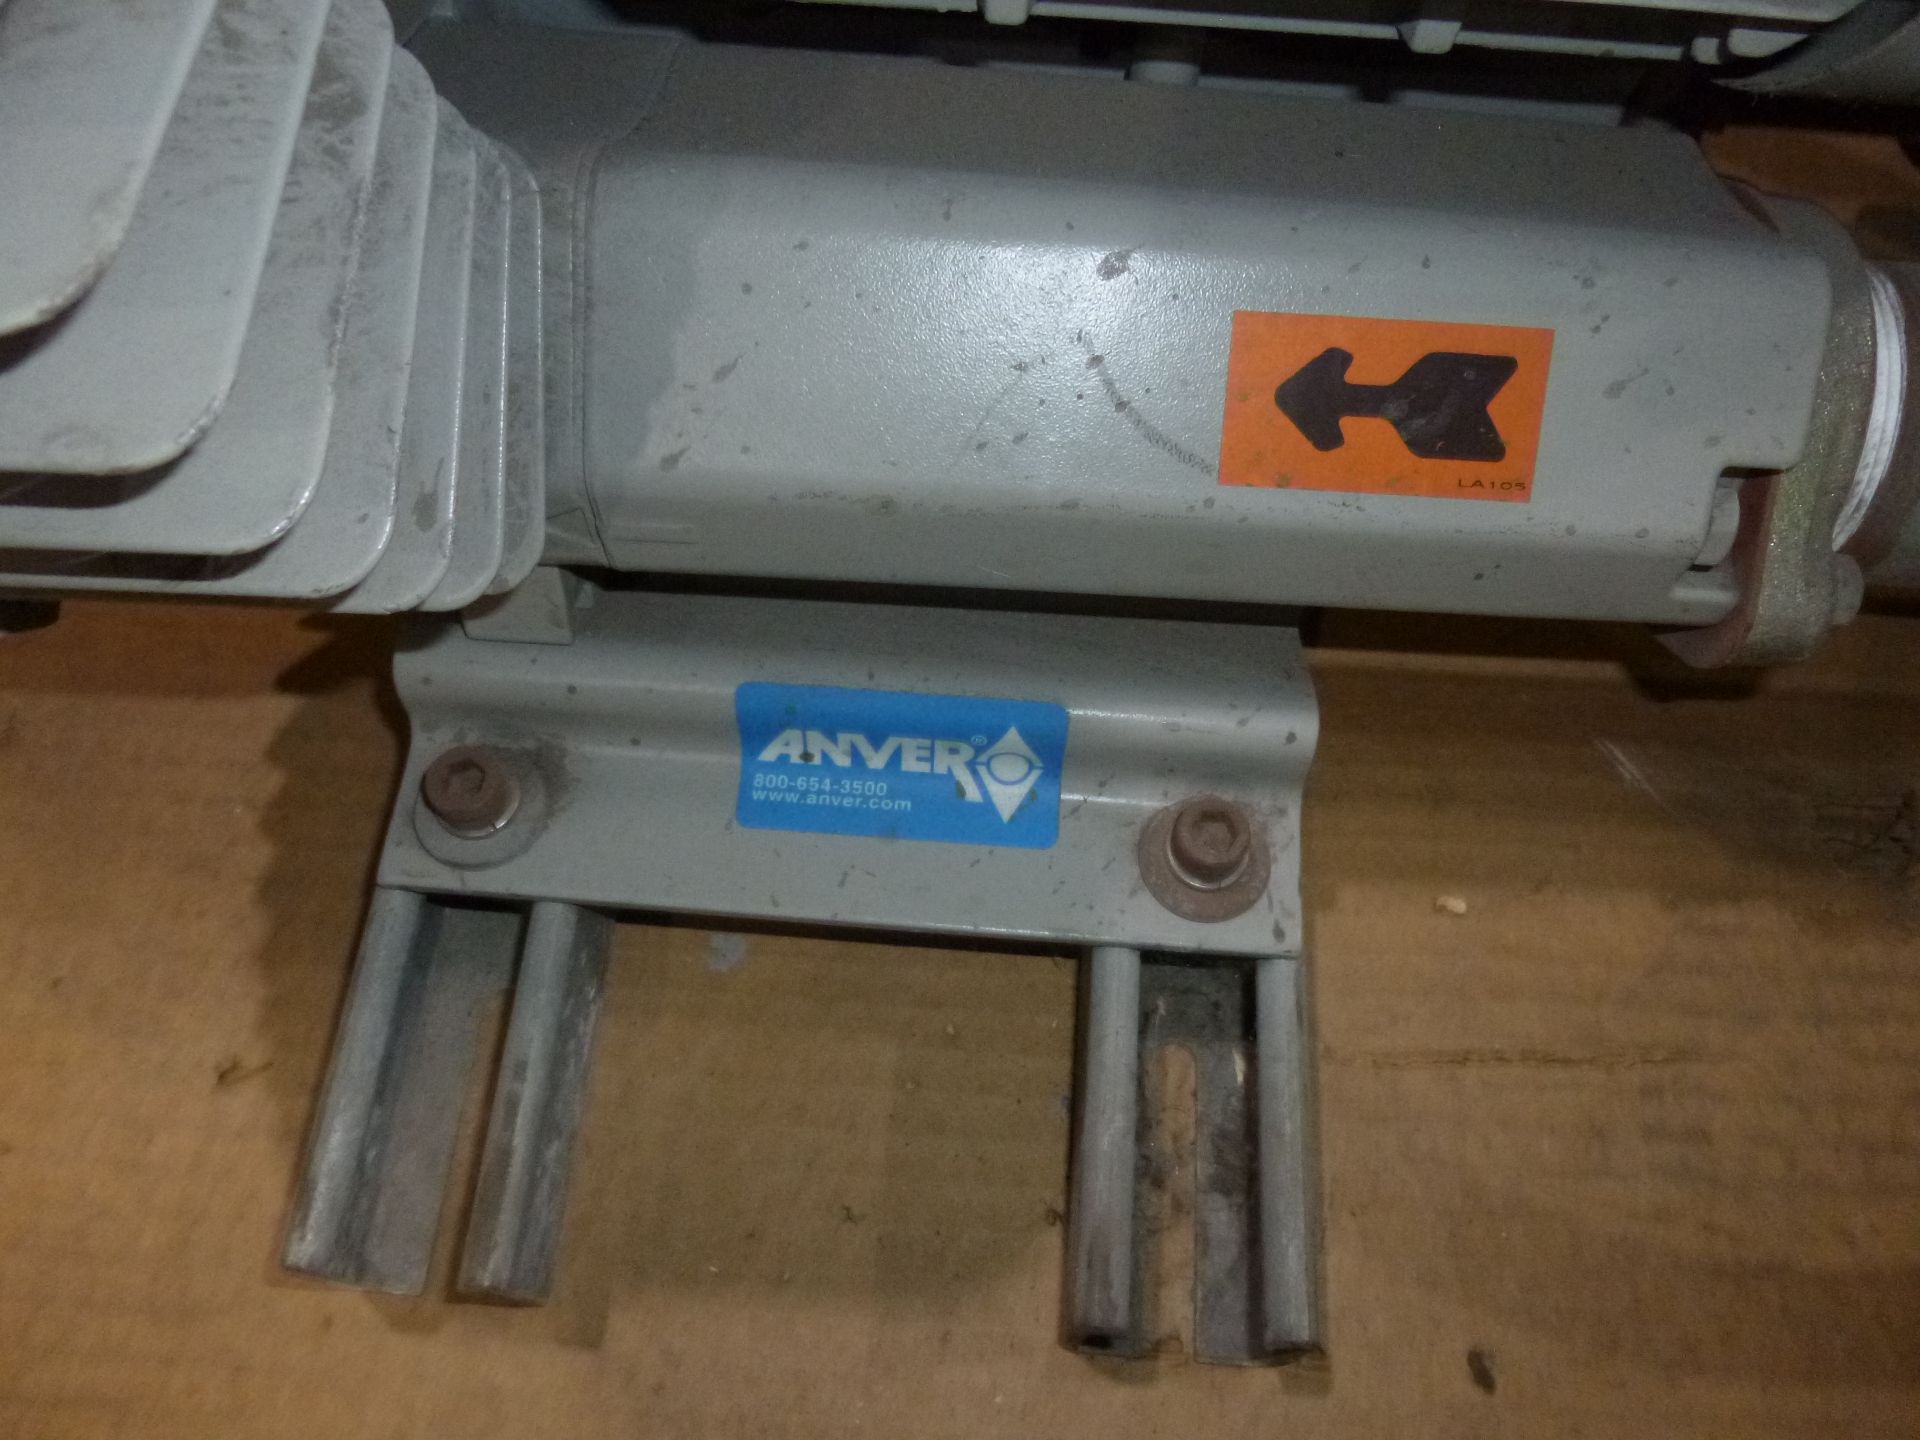 Anver Model VB4HF vacuum pump, as always with Brolyn LLC auctions, all lots can be picked up from - Image 2 of 5